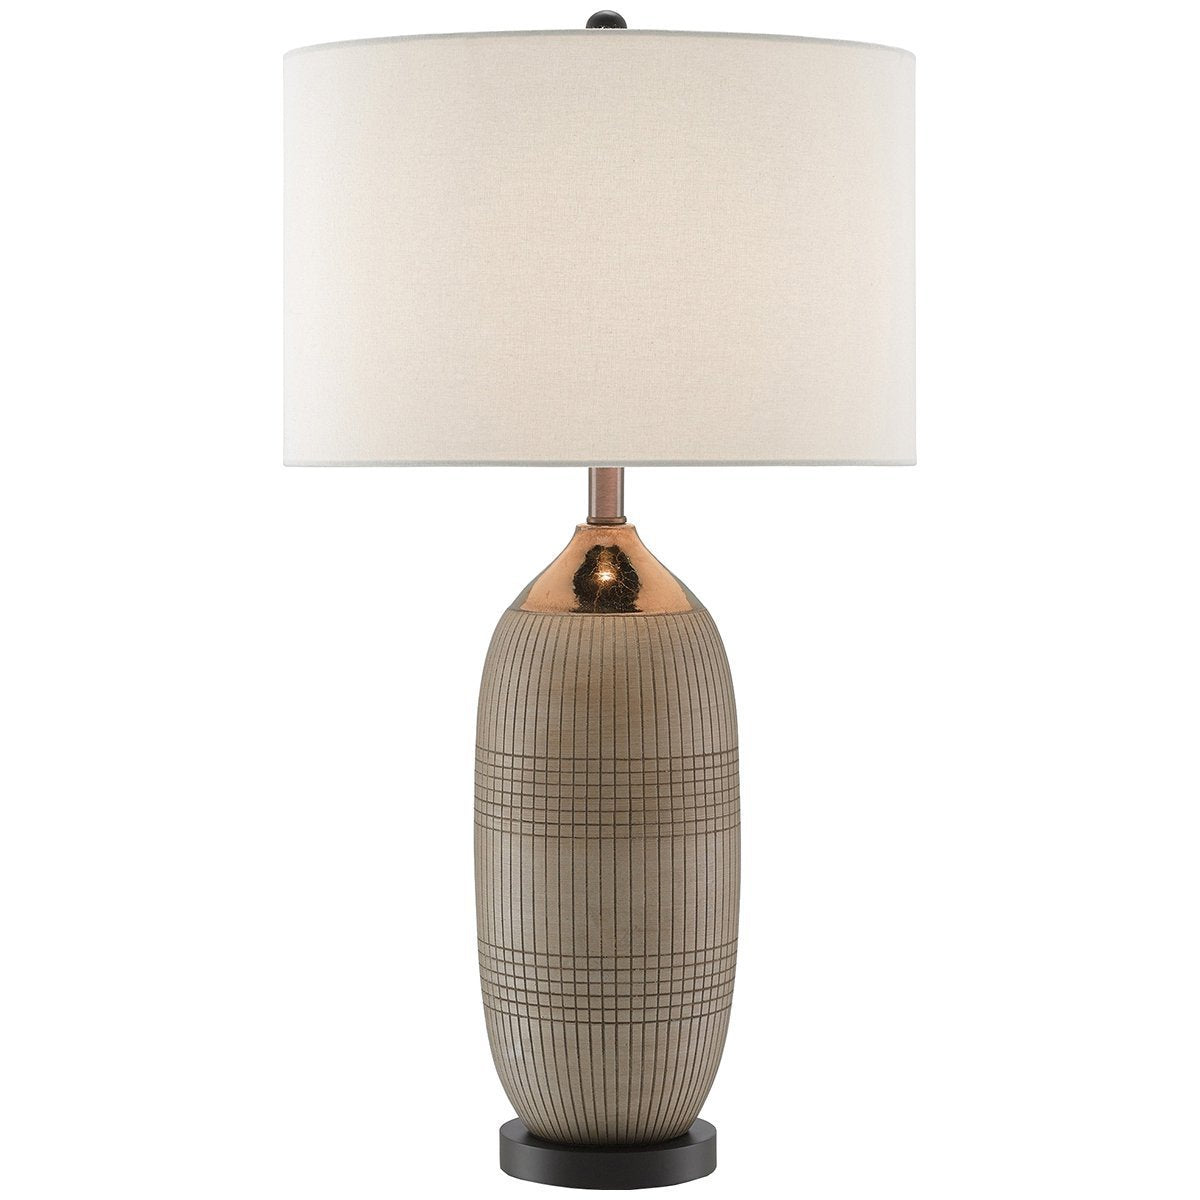 Currey and Company Alexander Table Lamp